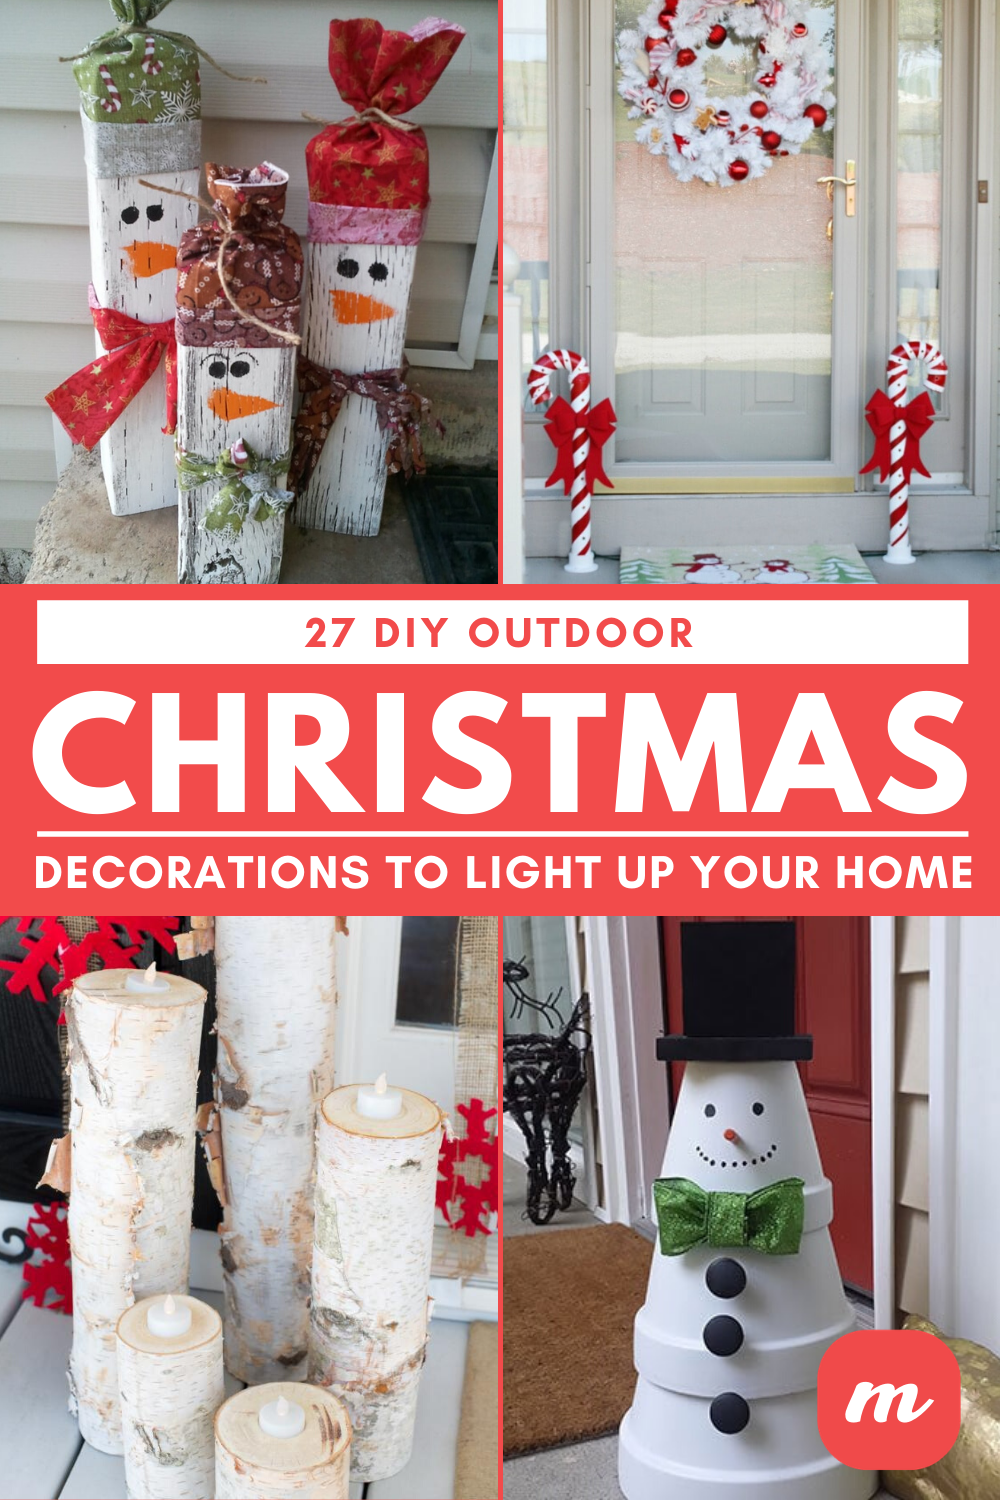 27 DIY Outdoor Christmas Decorations to Light Up Your Home -   24 diy christmas decorations dollar tree 2020 ideas